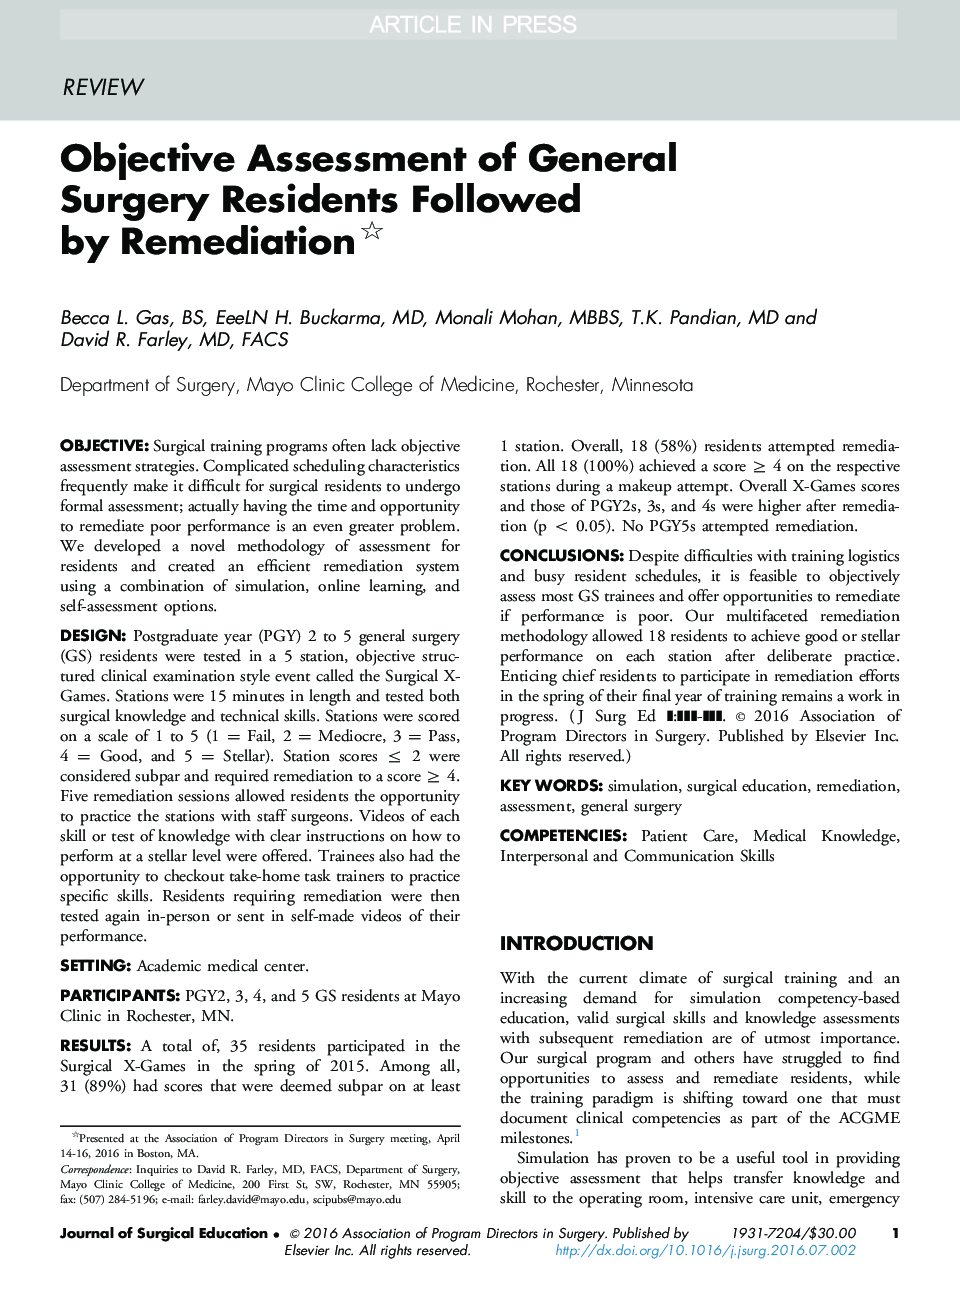 Objective Assessment of General Surgery Residents Followed by Remediation